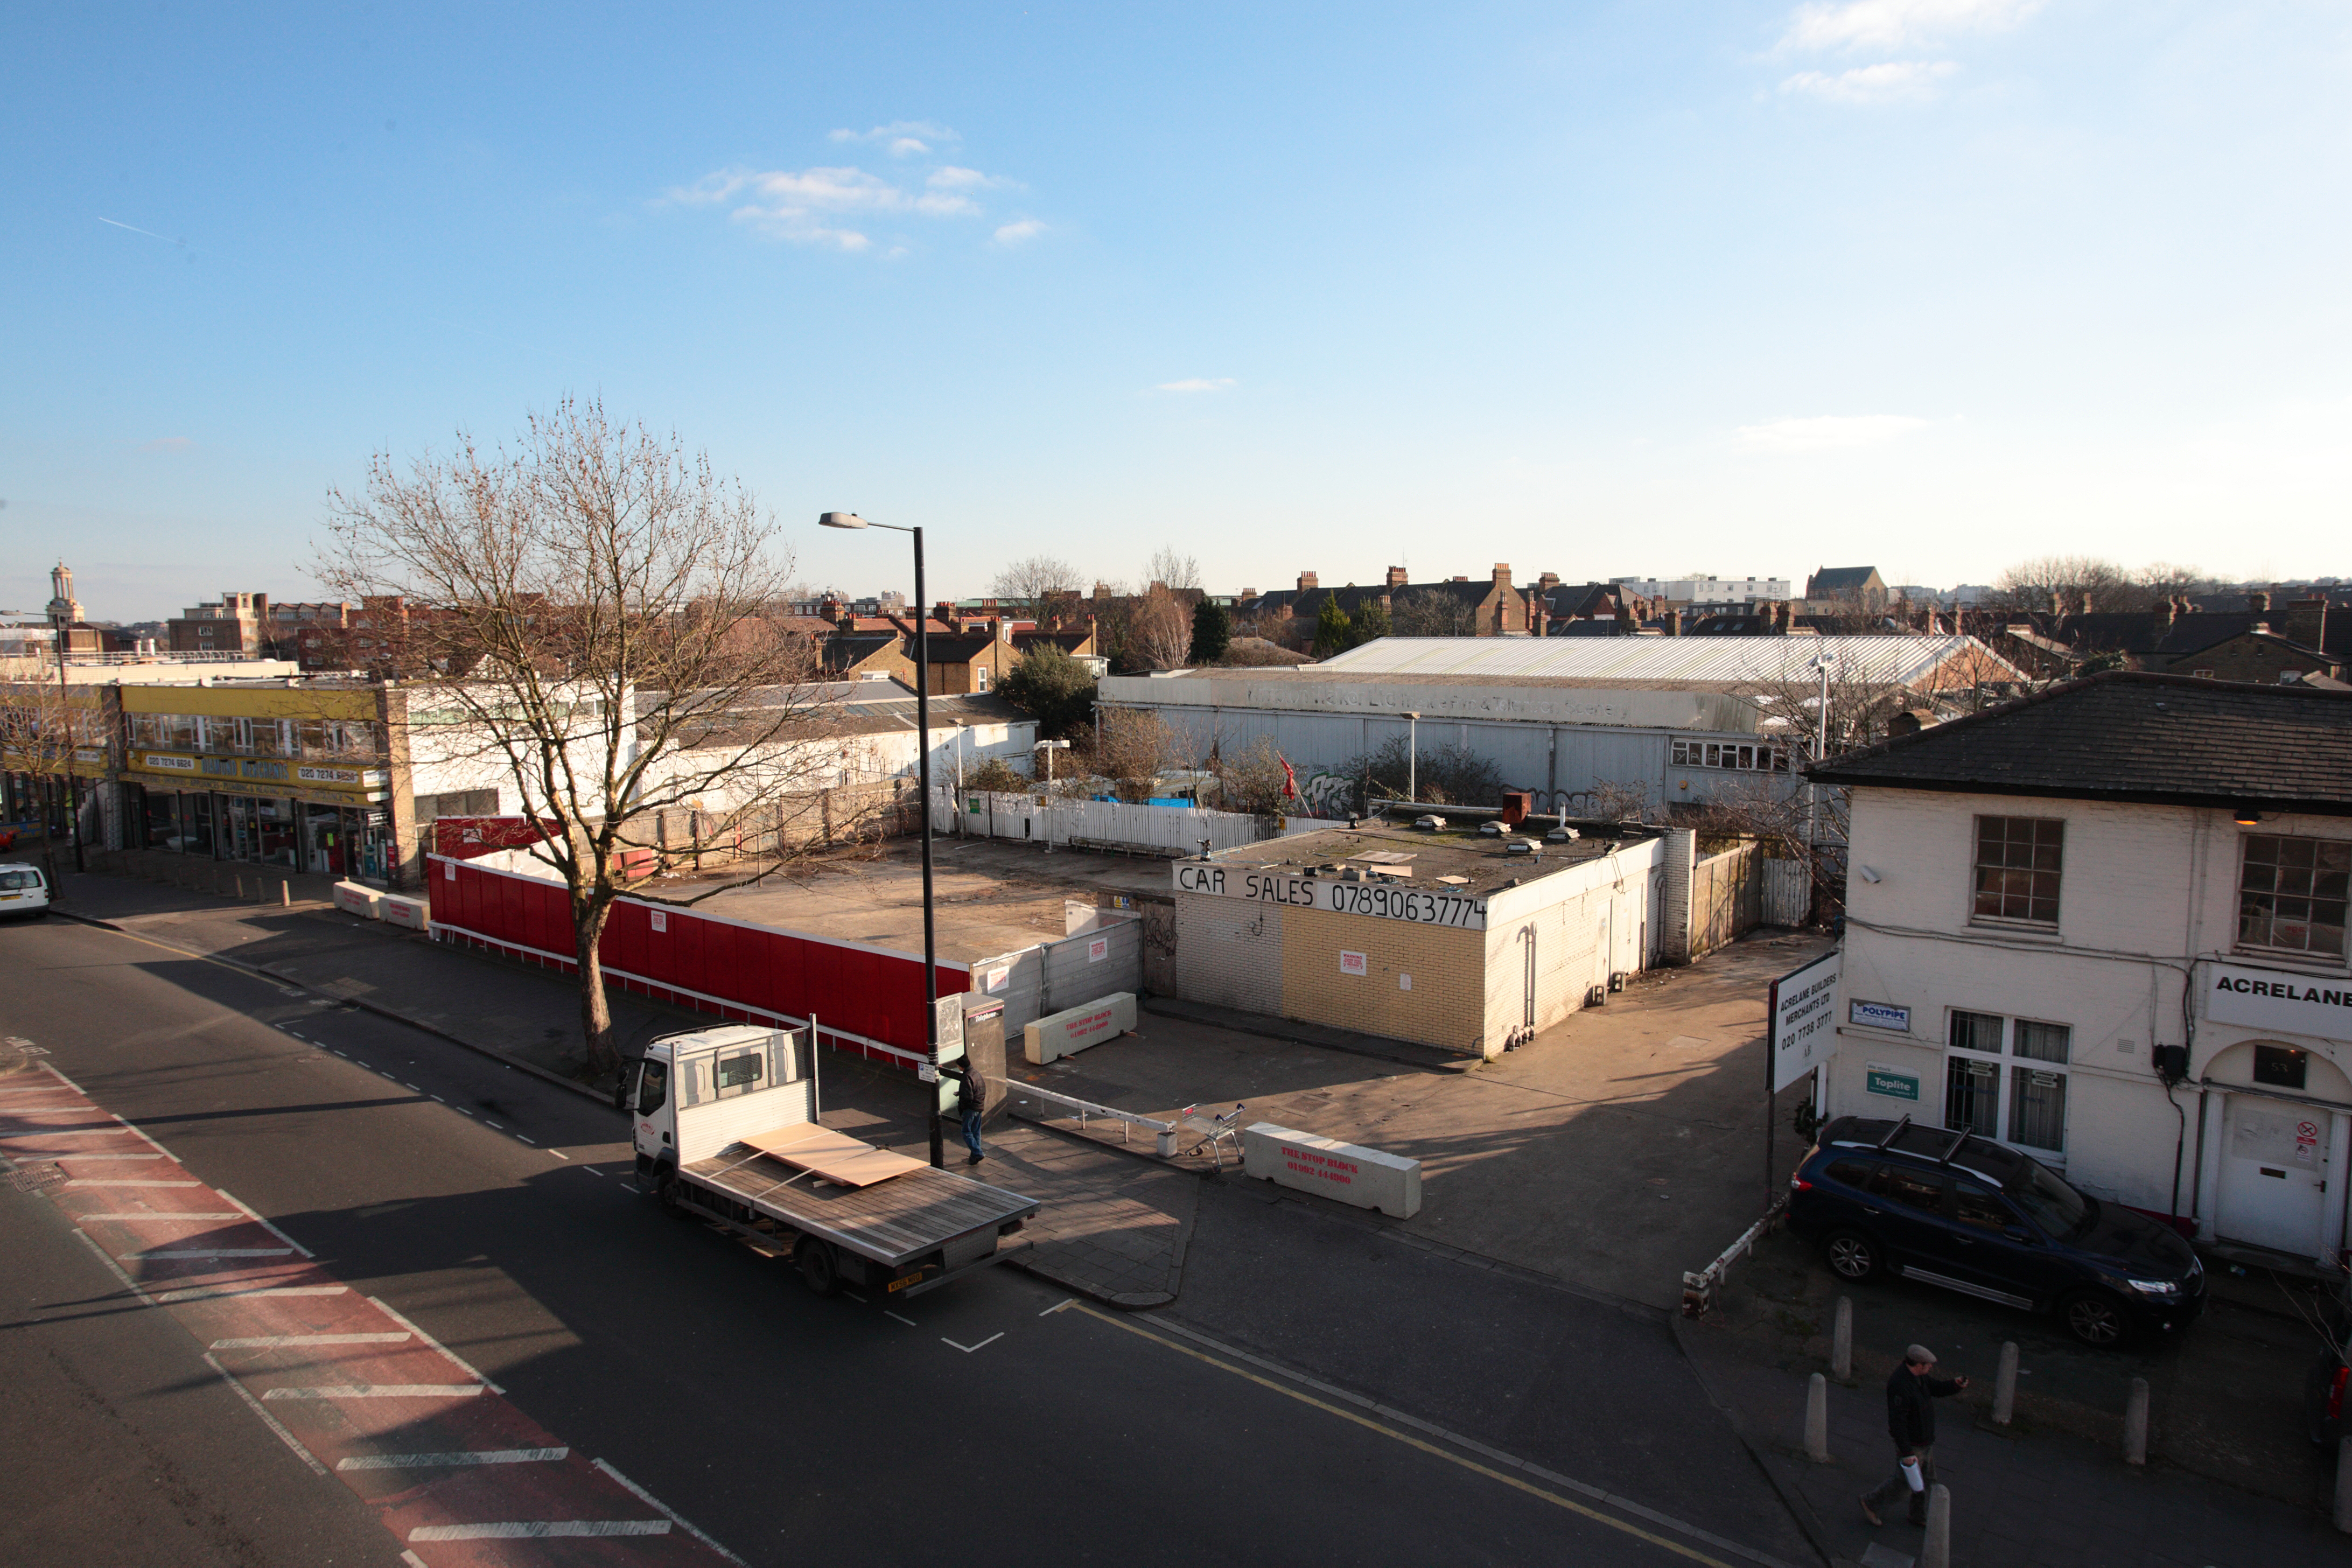 Former petrol station with redevelopment potential for mixed use scheme. Acquired unconditionally. Acre Lane, SW2 London Borough of Lambeth.